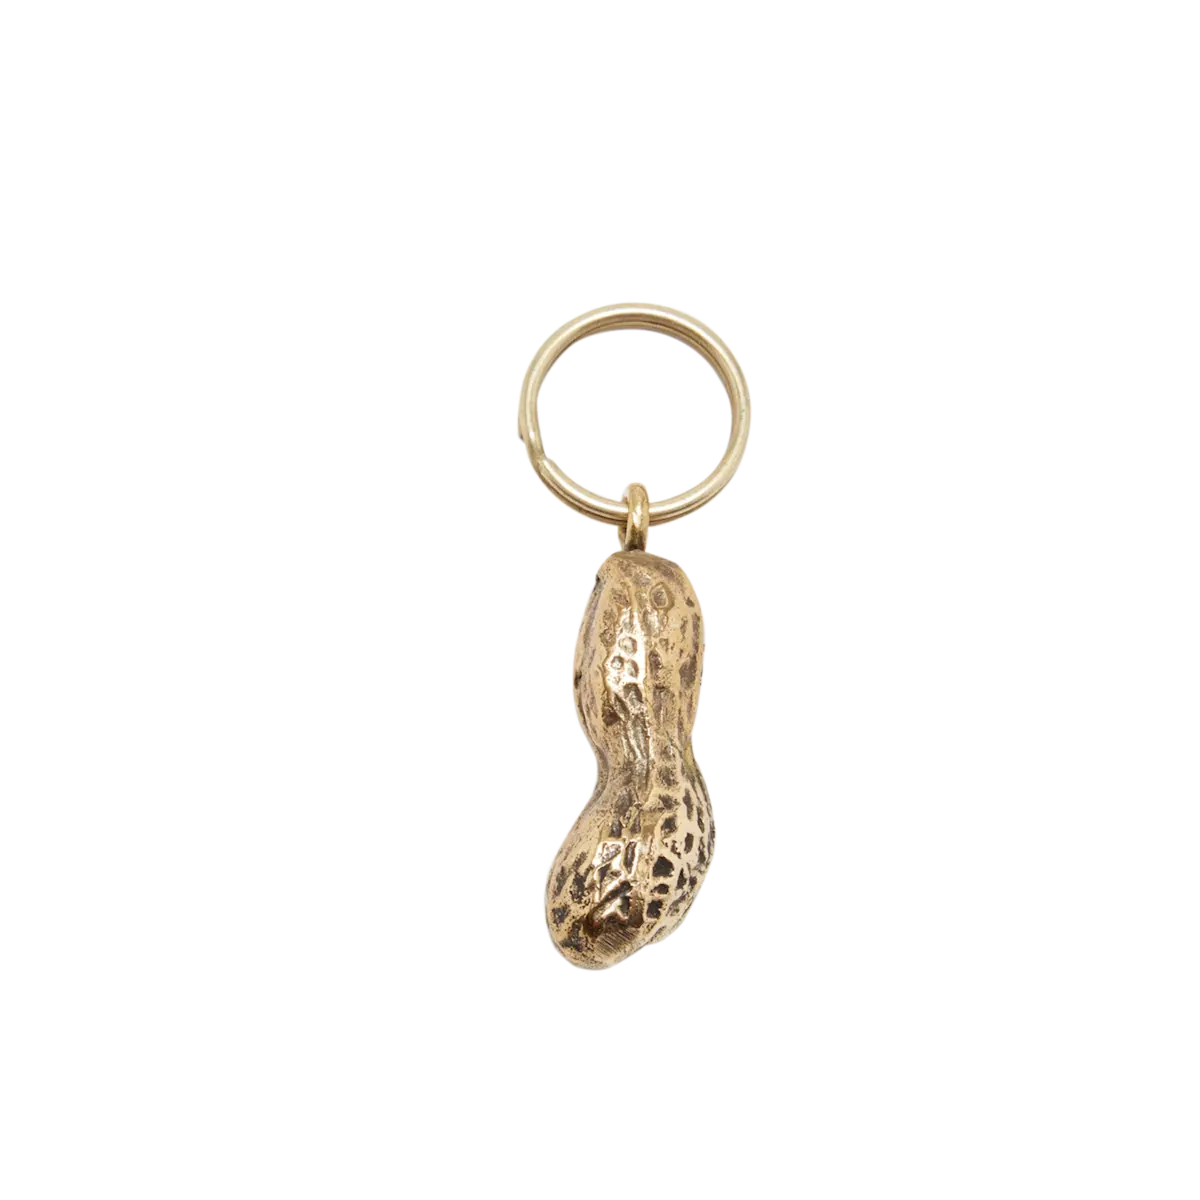 Handmade Solid Brass Antique Peanut Keychain for Daily Use Unique Style High Quality Top Selling Latest 2021 Keyring Luxury Keys